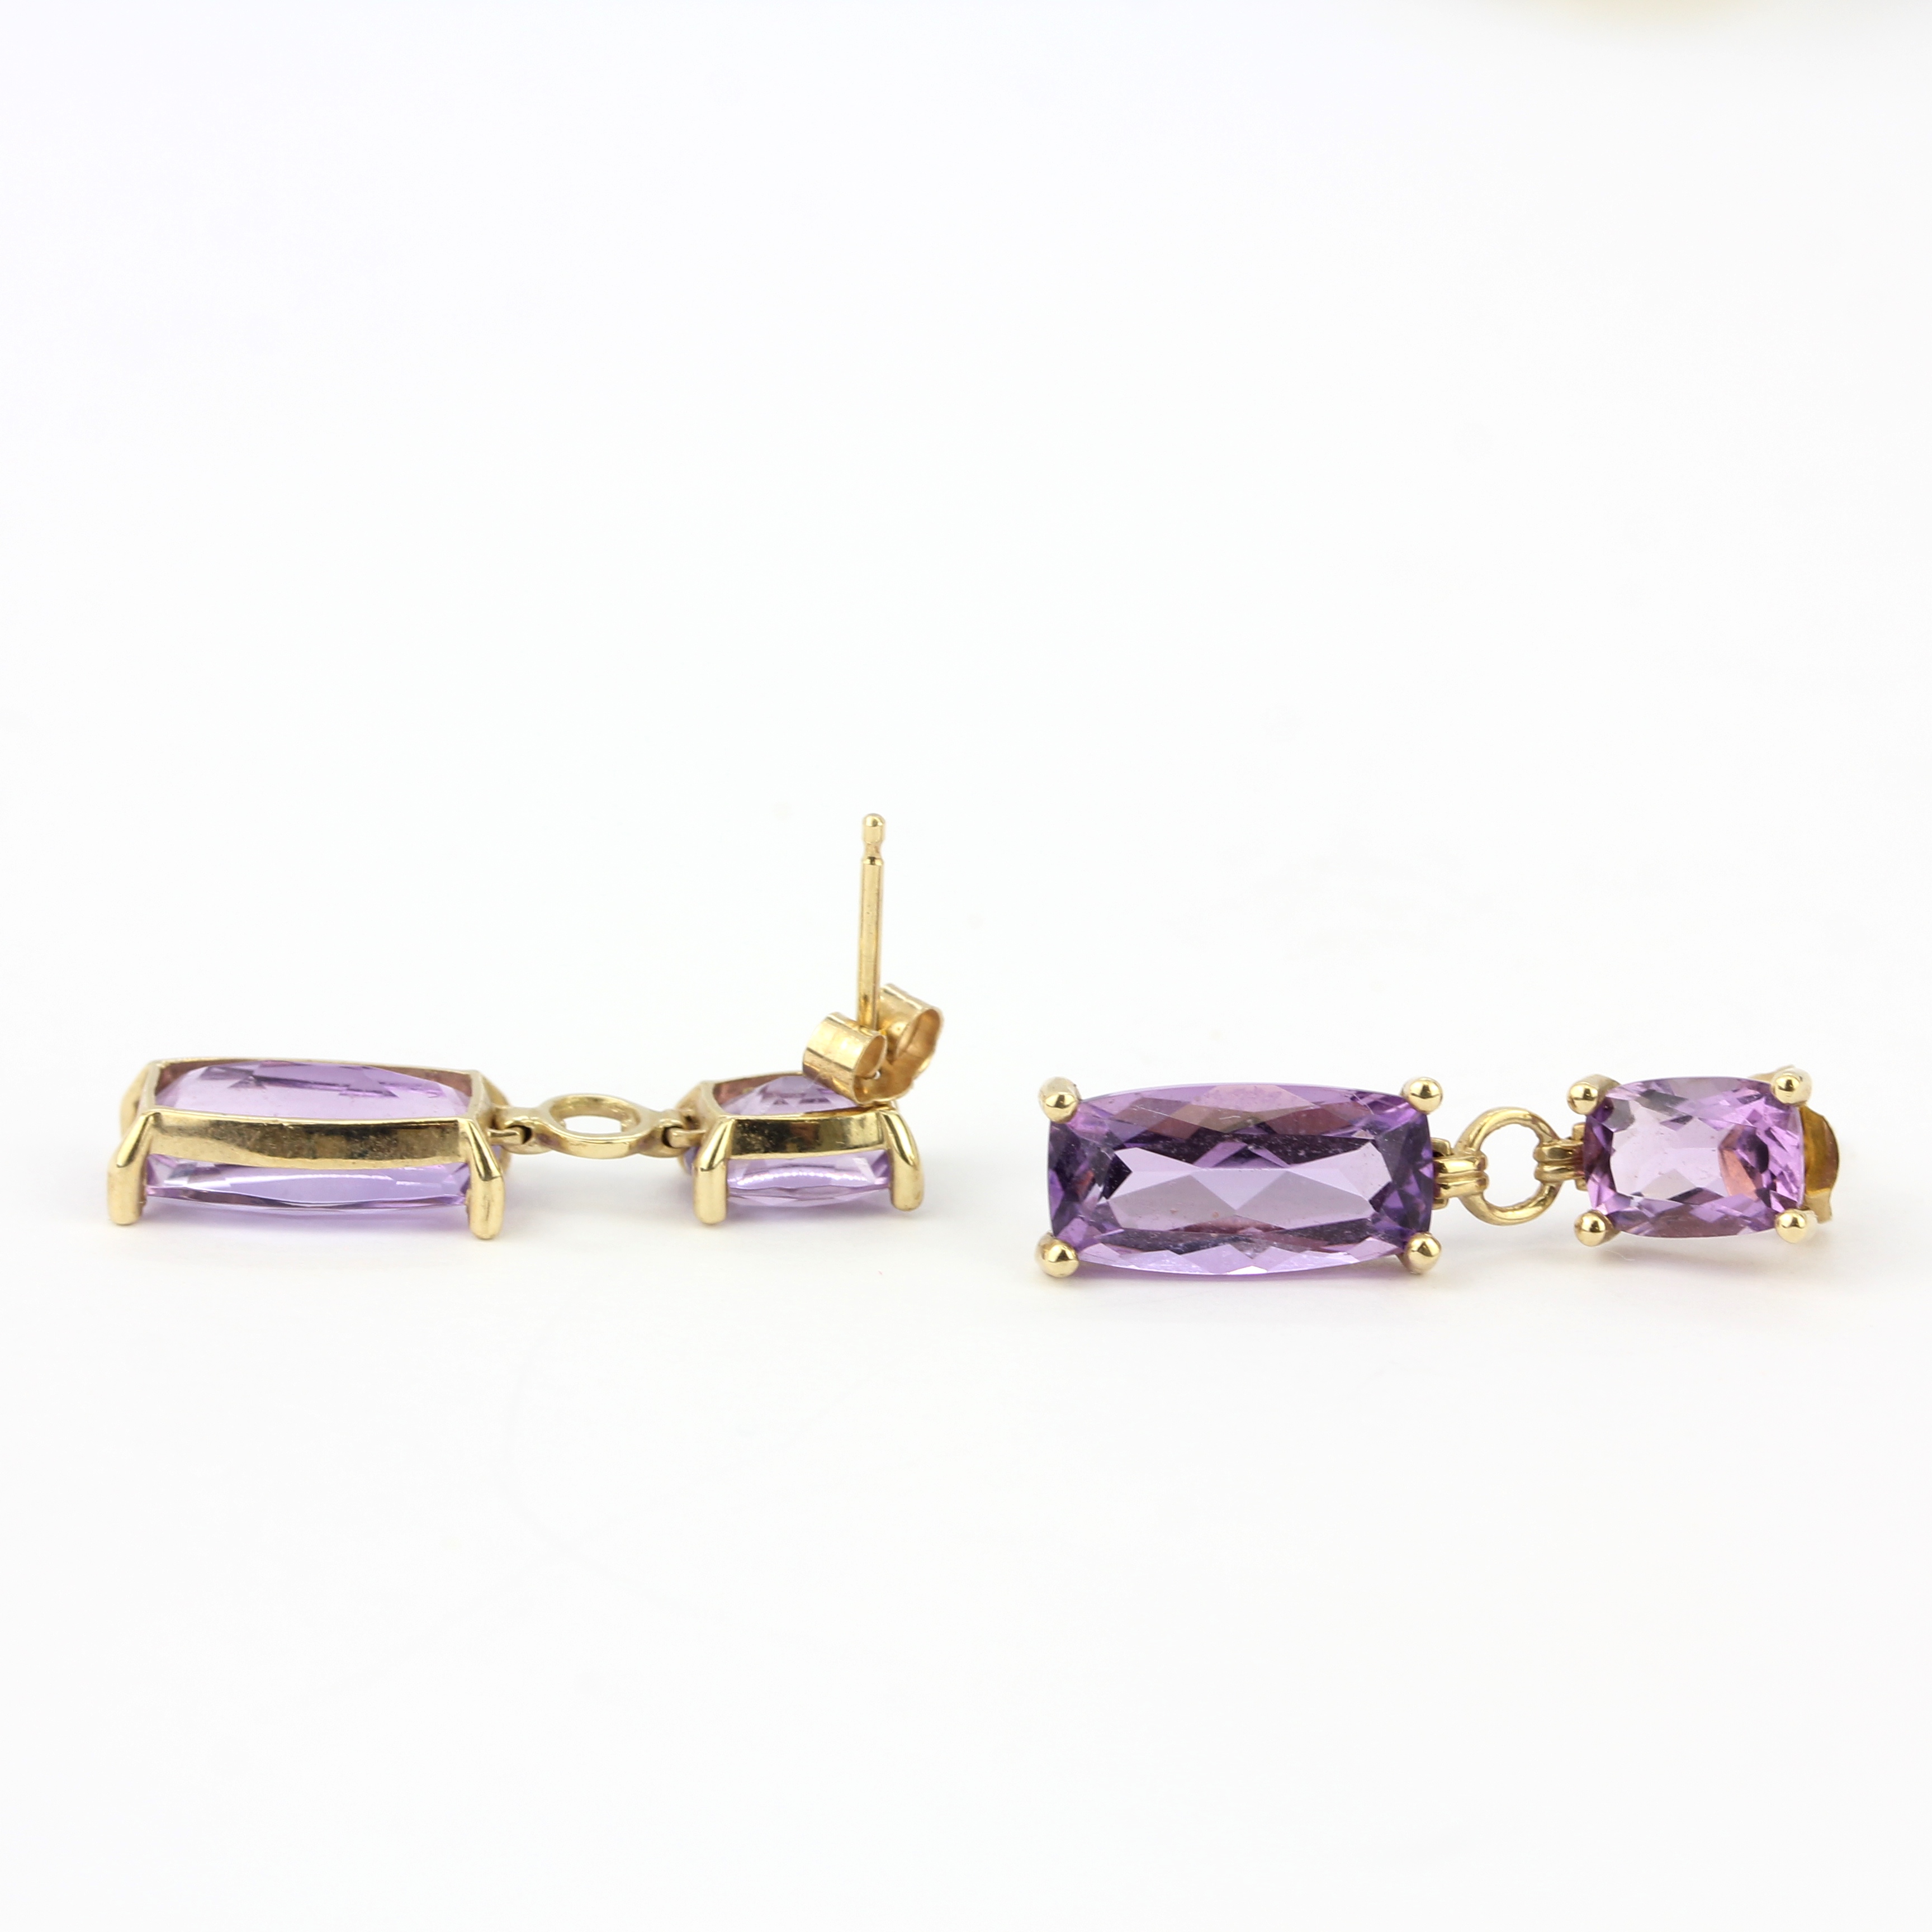 A pair of 9ct yellow gold droop earrings set with fancy cut amethysts, L. 2.5cm. - Image 3 of 3